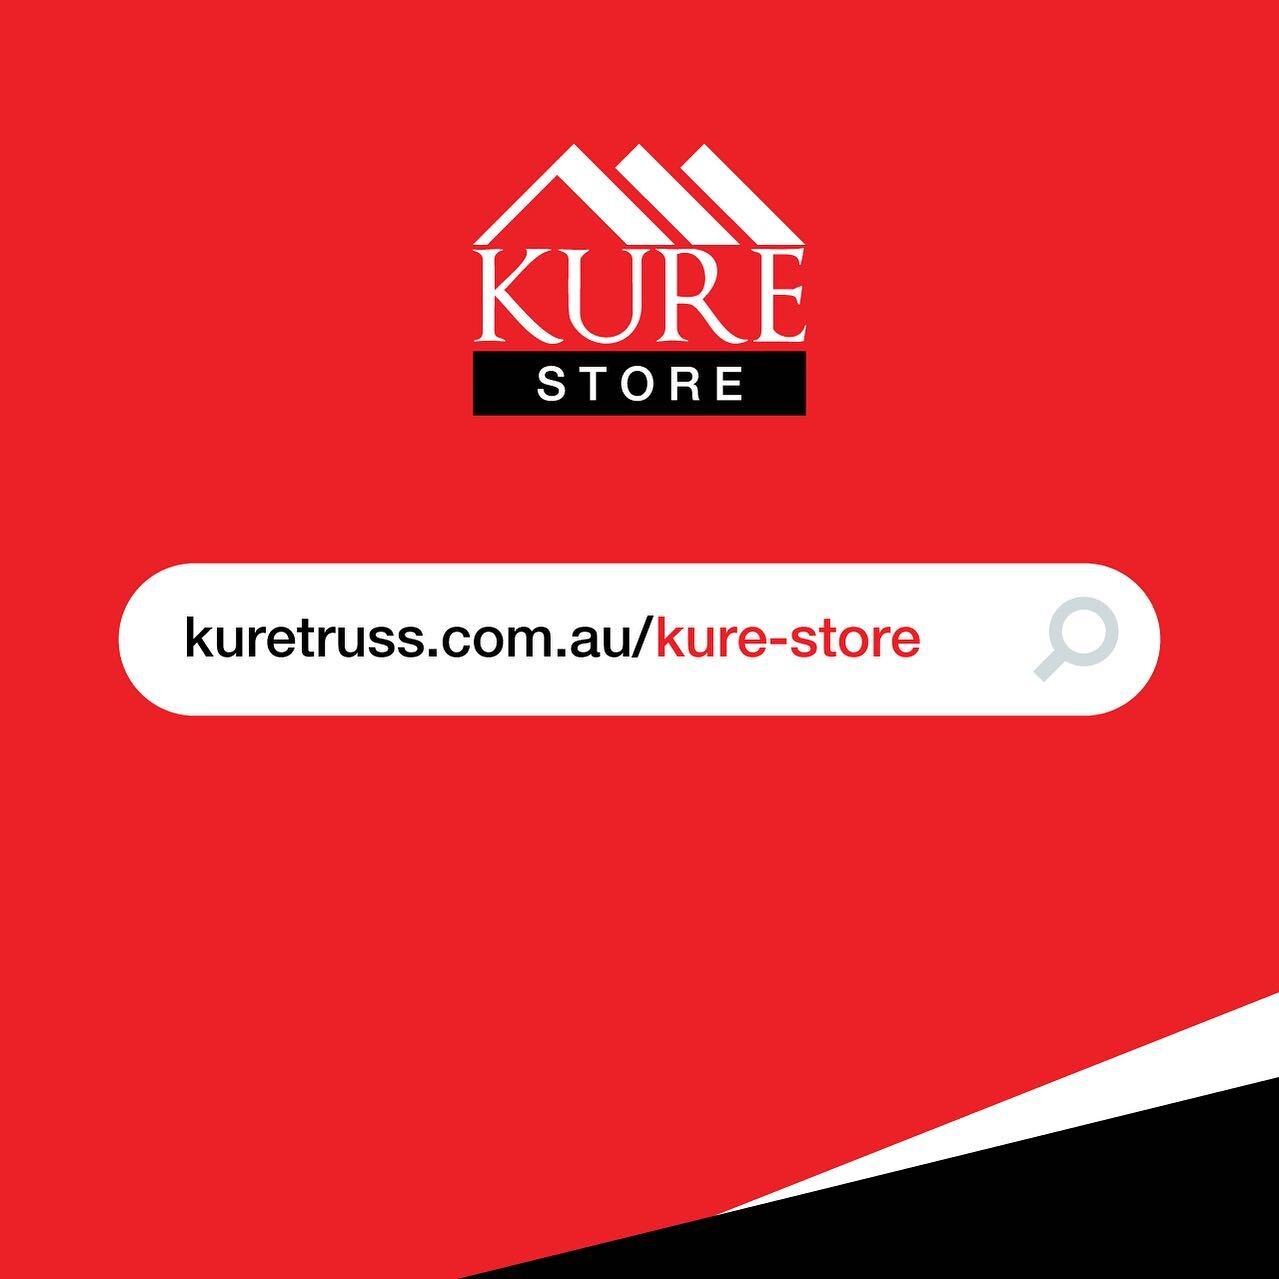 KURE STORE ONLINE AND ACTIVE NOW.

What are you waiting for?